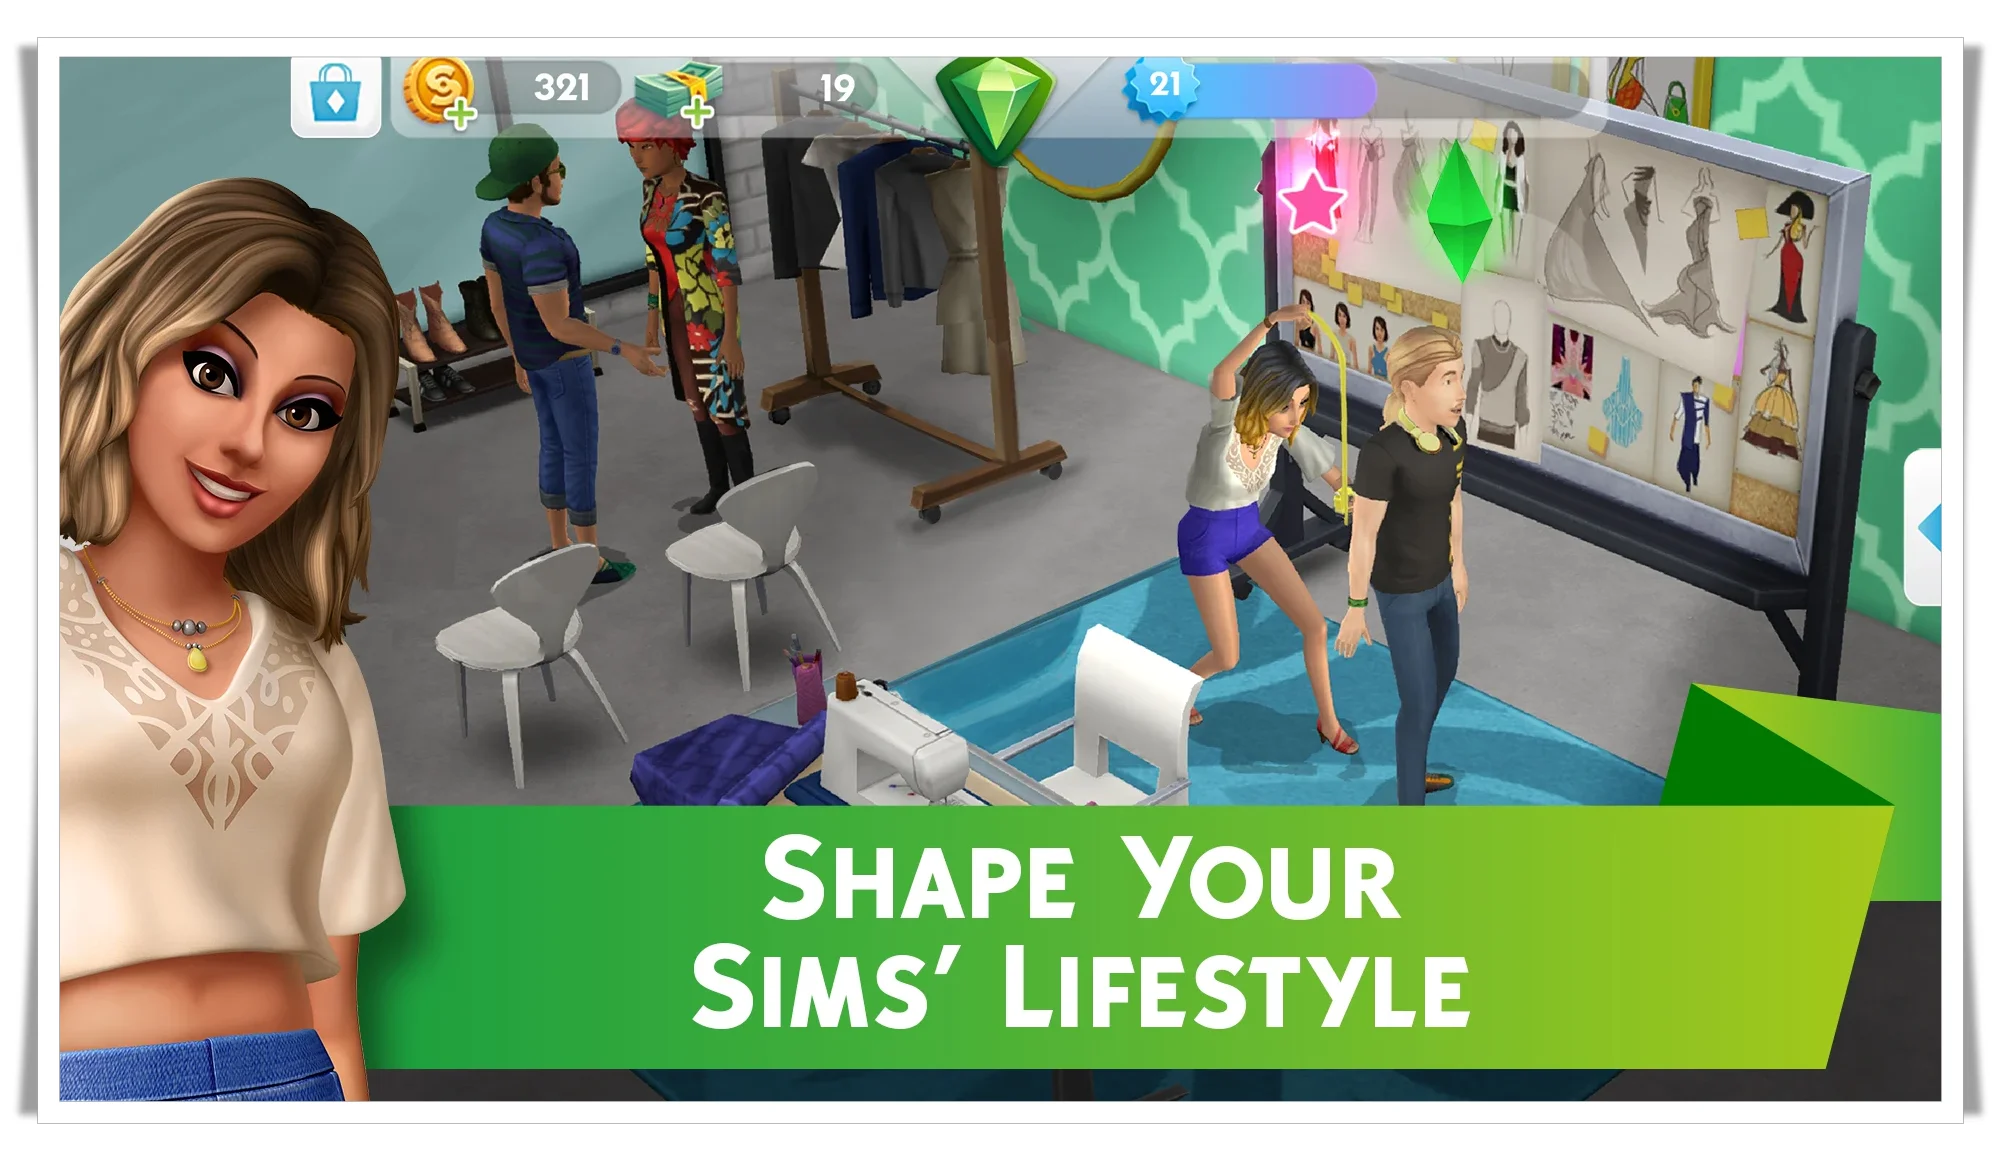 The Sims Mobile APK + Mod 42.1.3.150360 - Download Free for Android